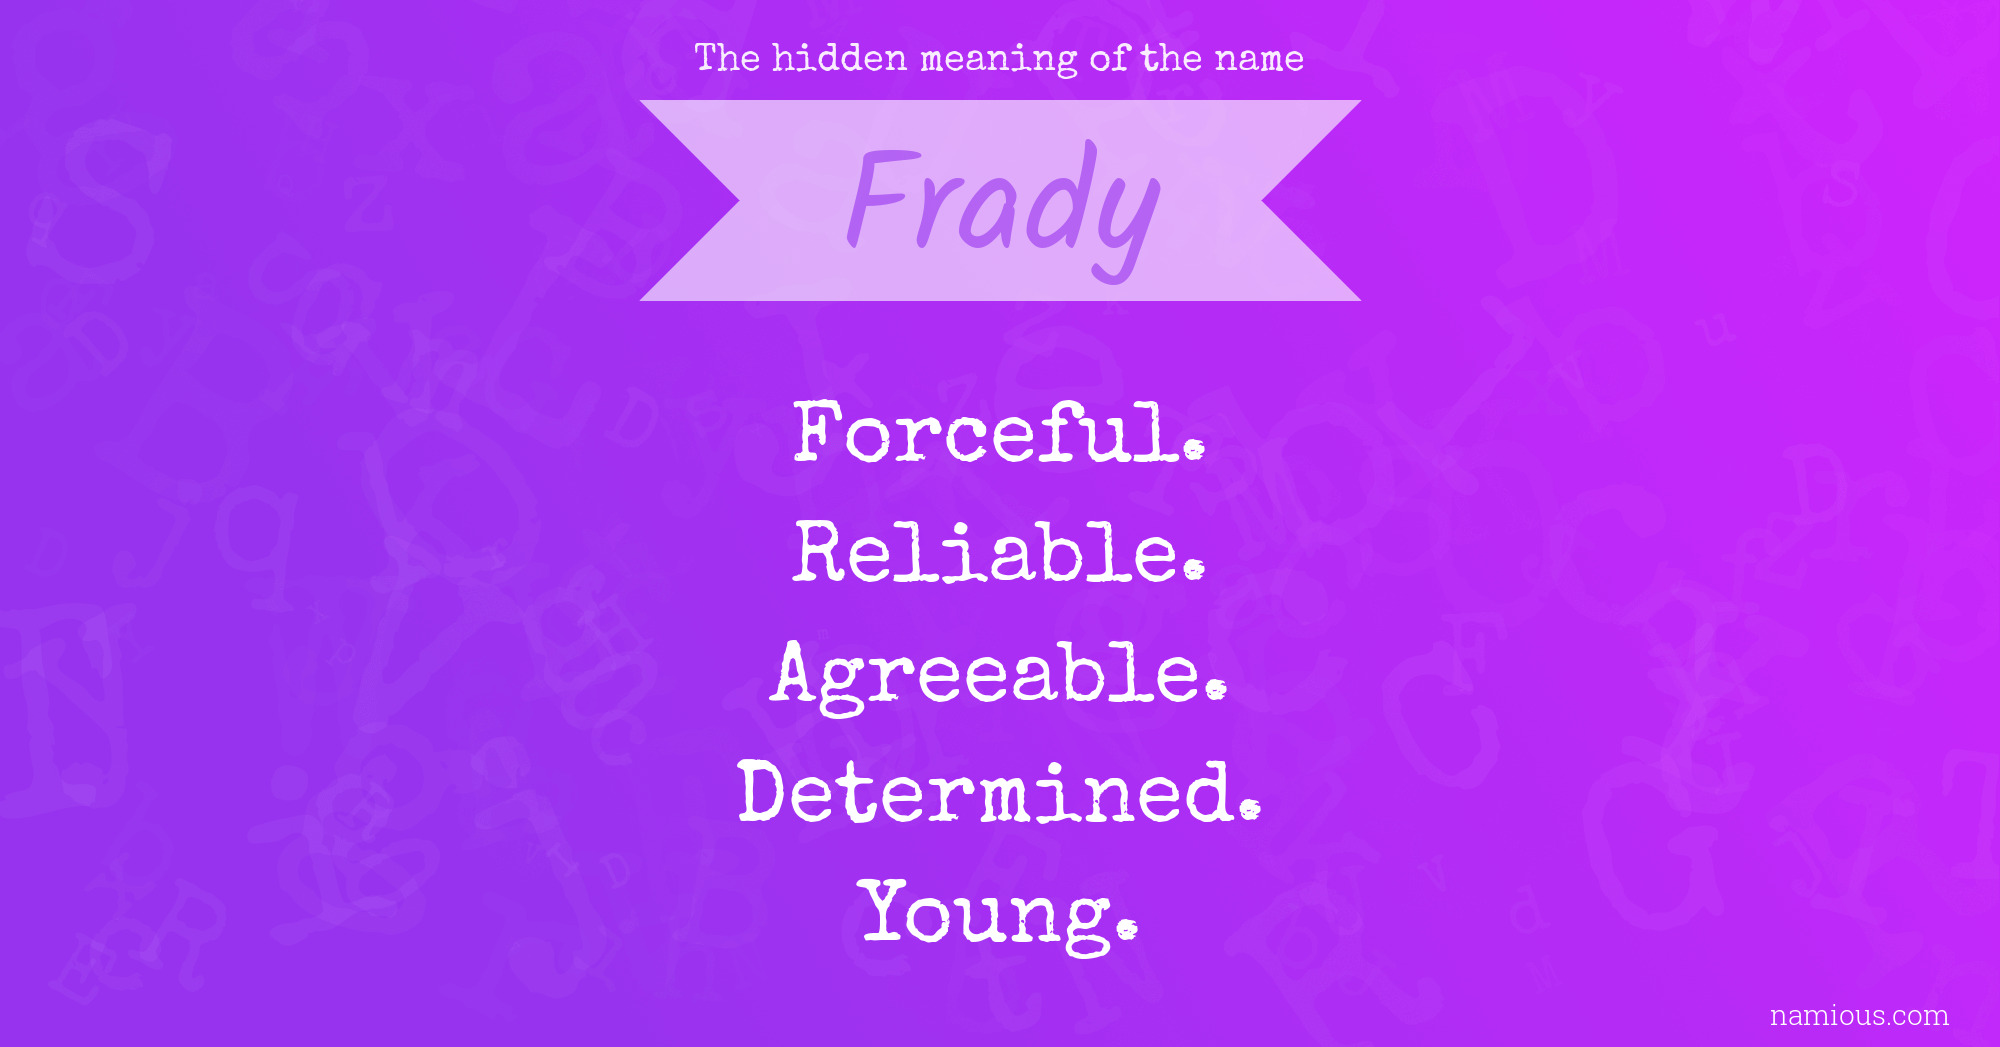 The hidden meaning of the name Frady